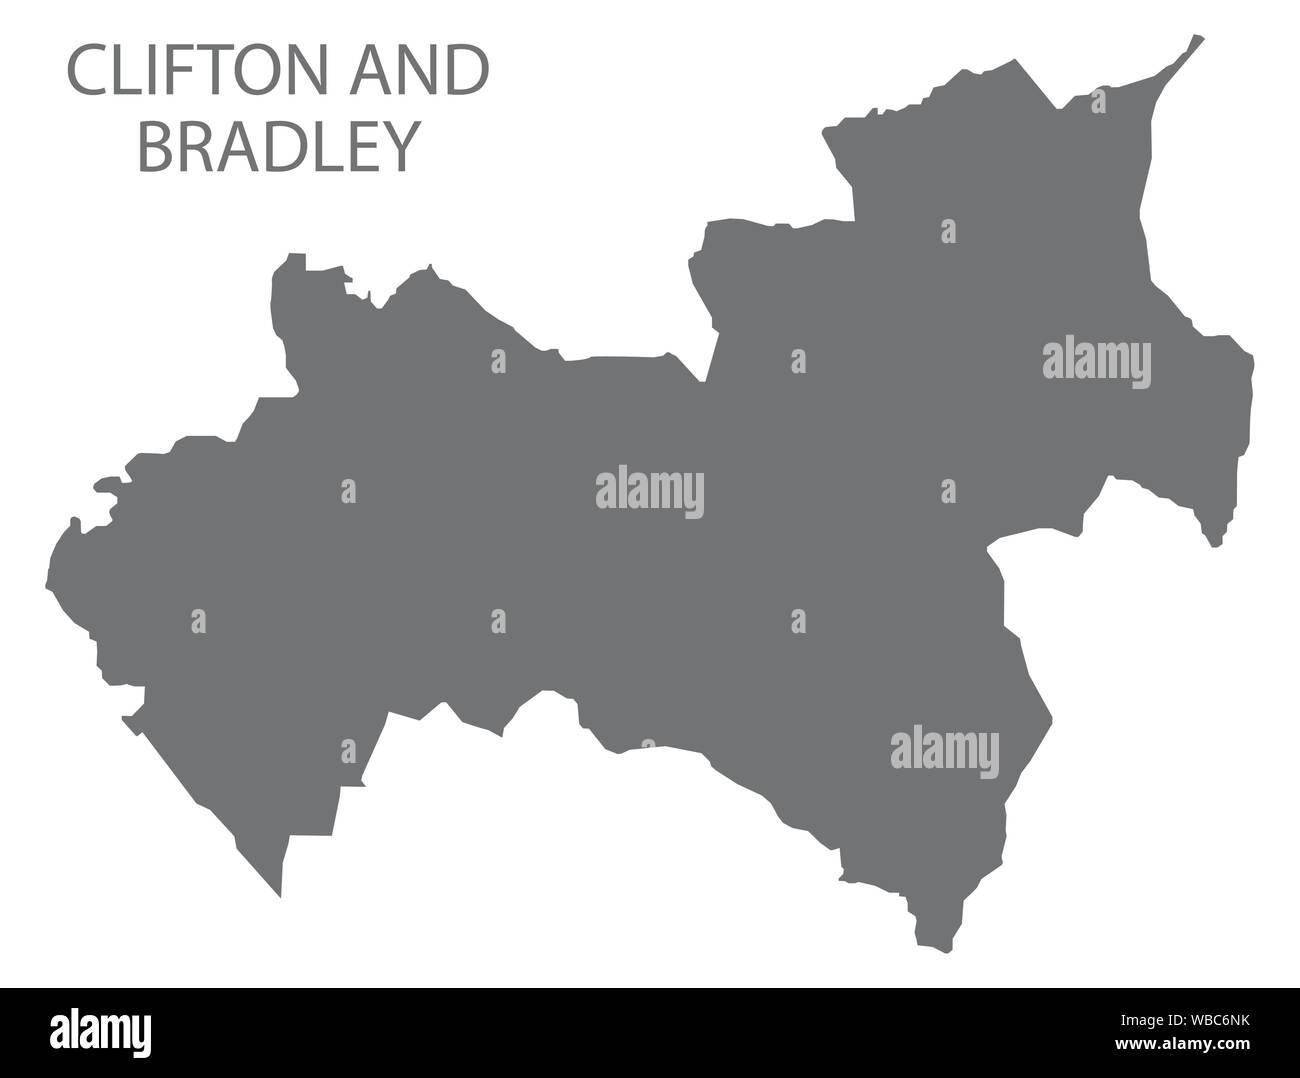 Clifton and Bradley grey ward map of Derbyshire Dales district in East Midlands England UK Stock Vector